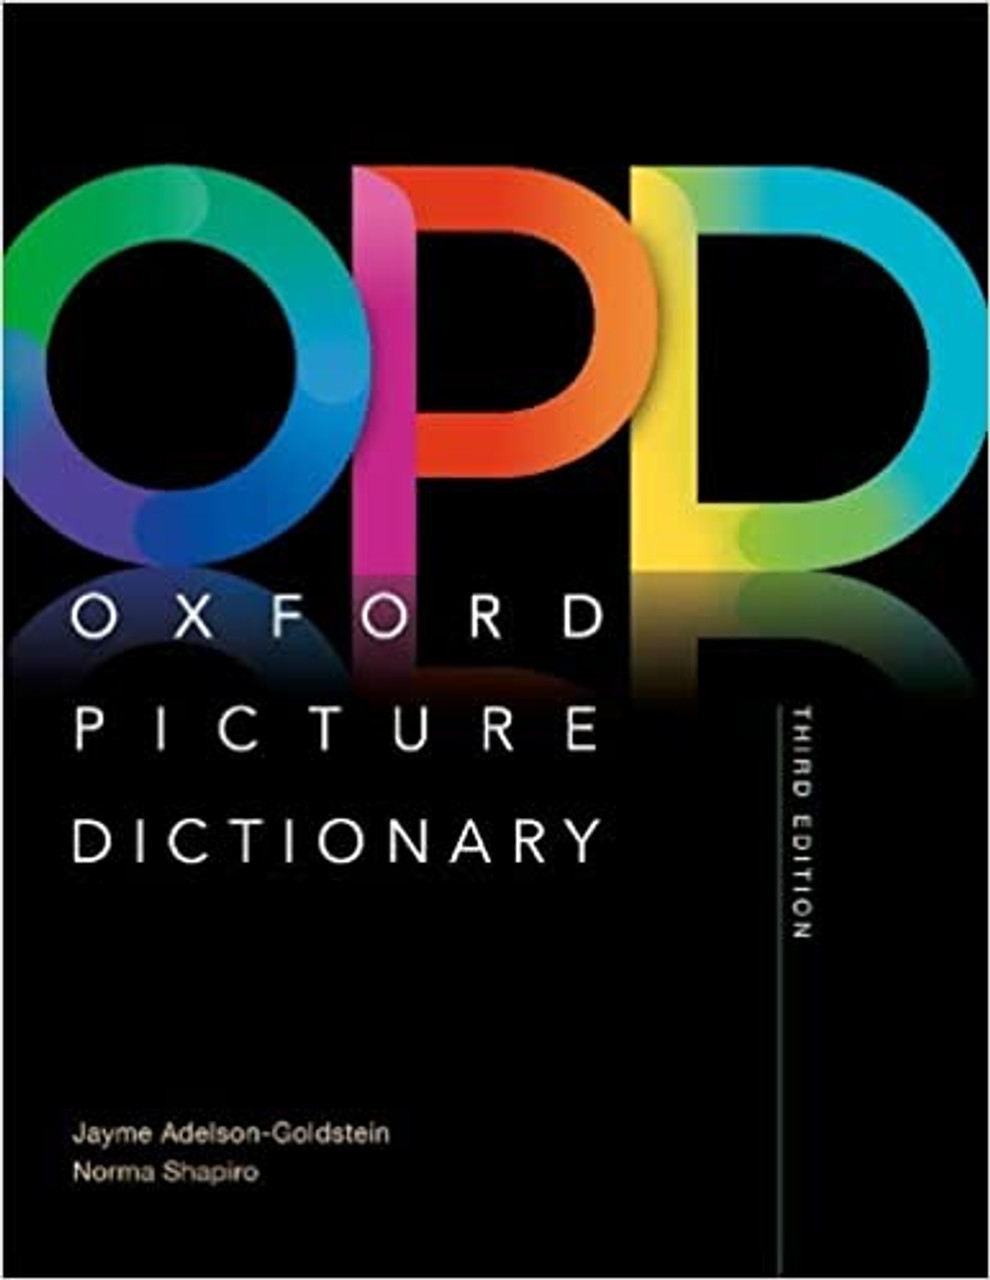 Dictionary　(3RD　Monolingual　Picture　Oxford　Dictionary　Third　Edition:　ed.)　BookPal